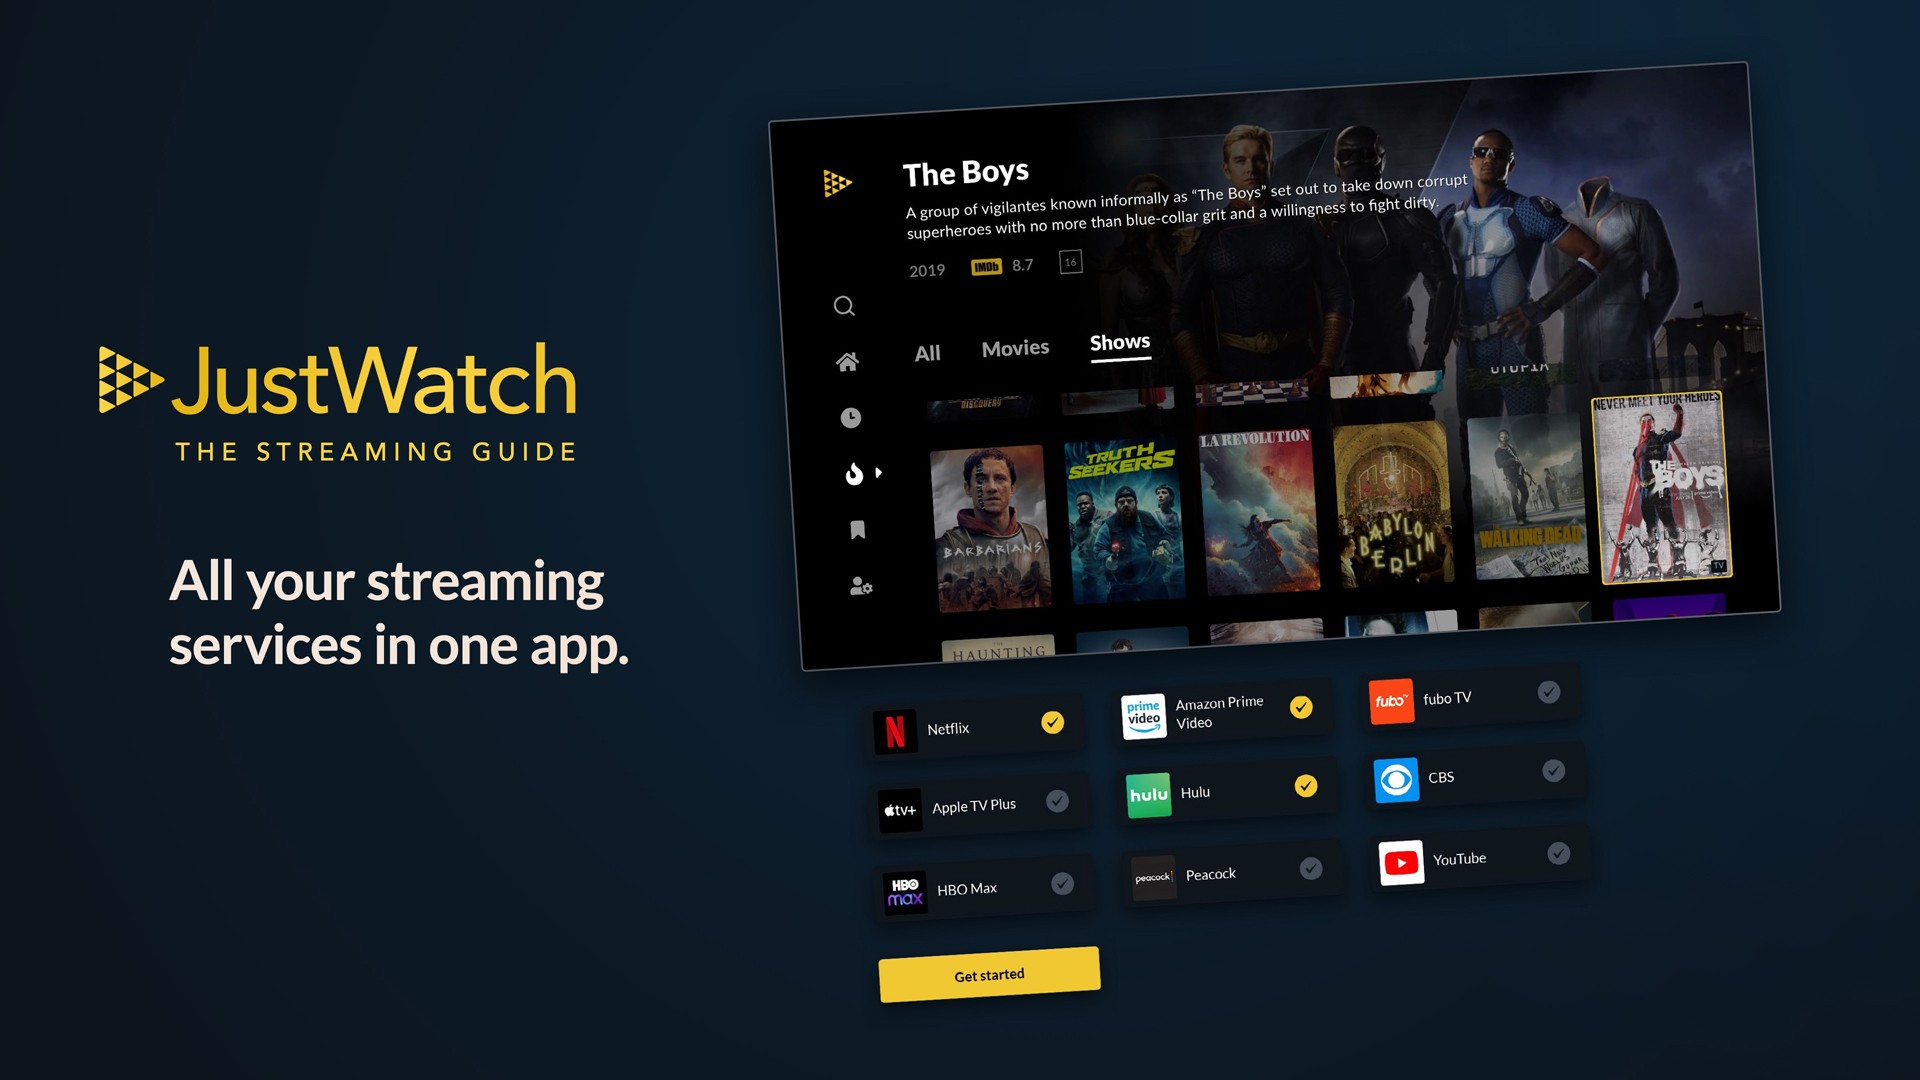 JustWatch App is Now Available on Xbox